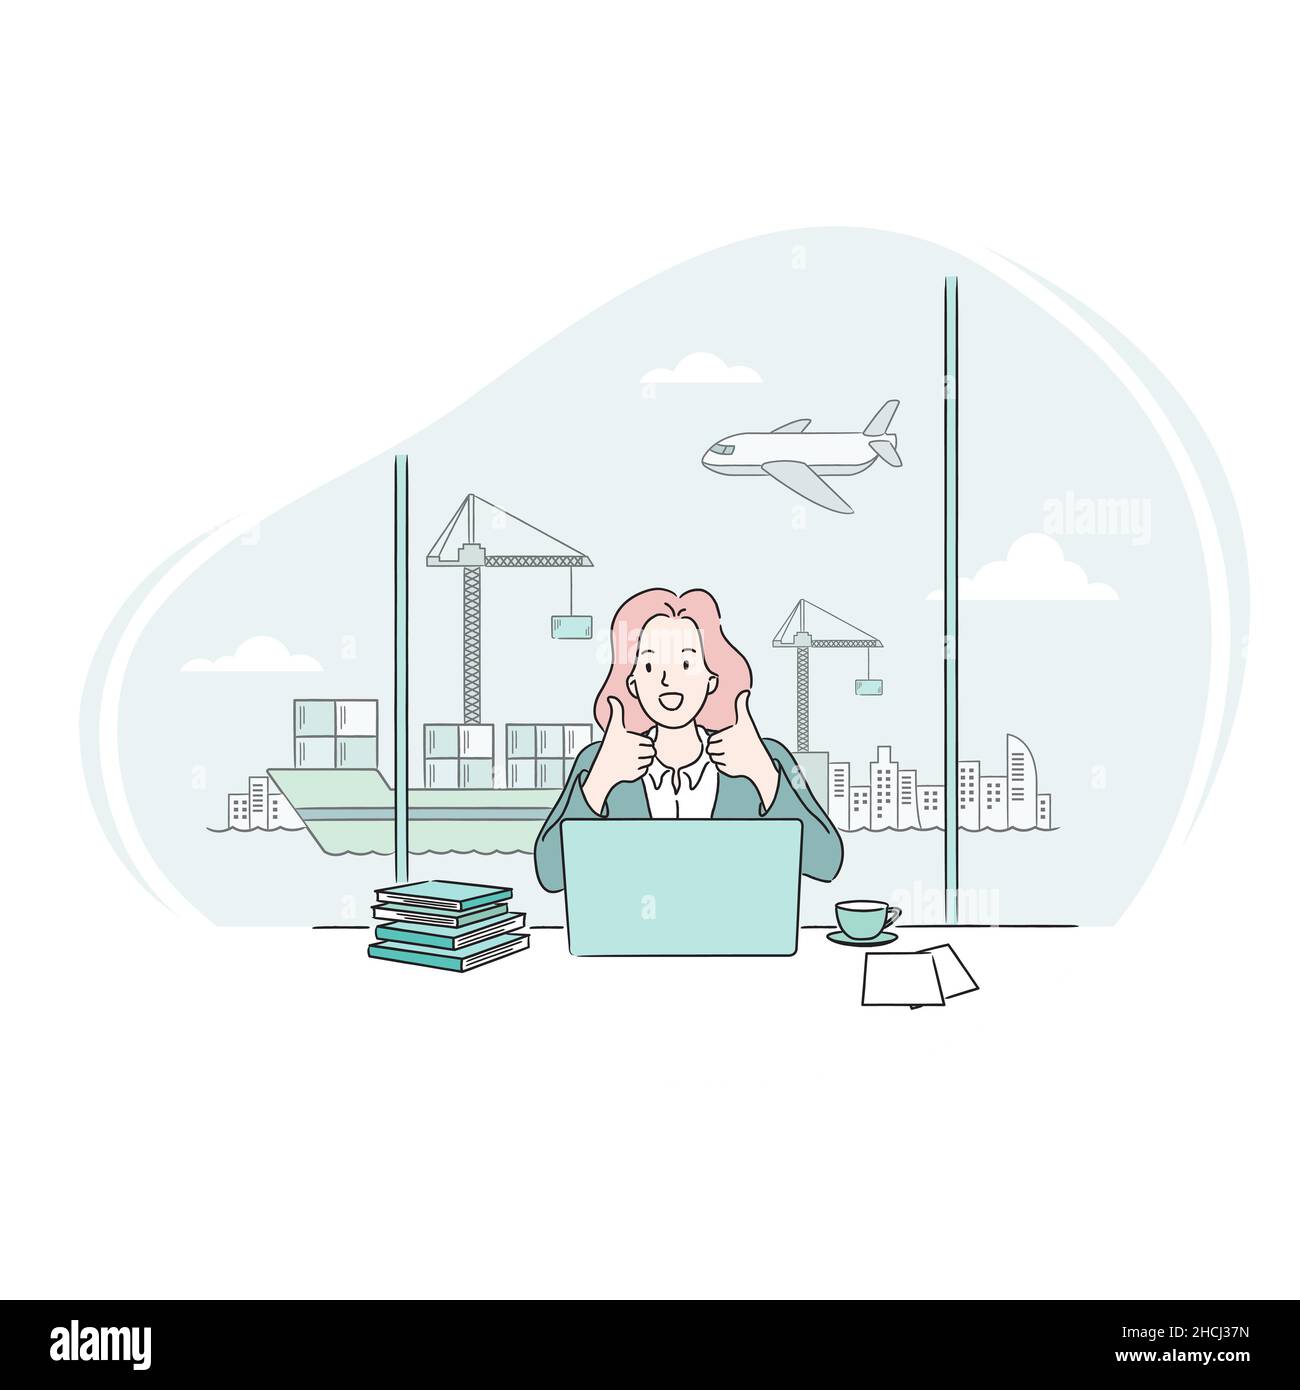 Business woman looking at laptop computer at desk and pointing thumbs up. Successful trade business concept. Line style business vector, illustration Stock Vector